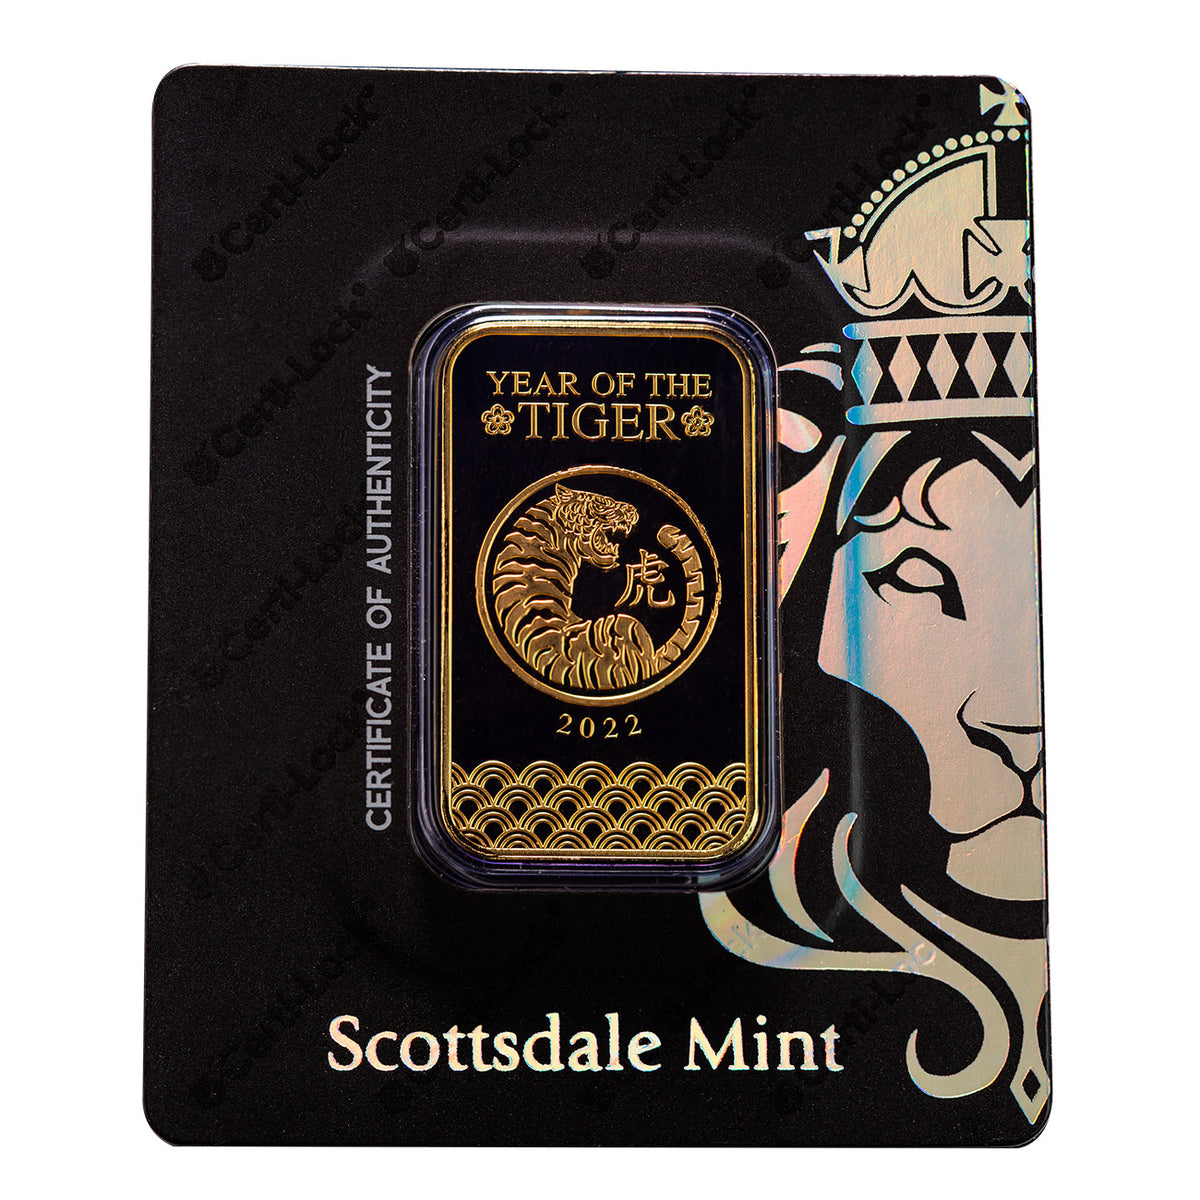 Scottsdale Mint 2022 Year of the Tiger 1 oz Gold Bar